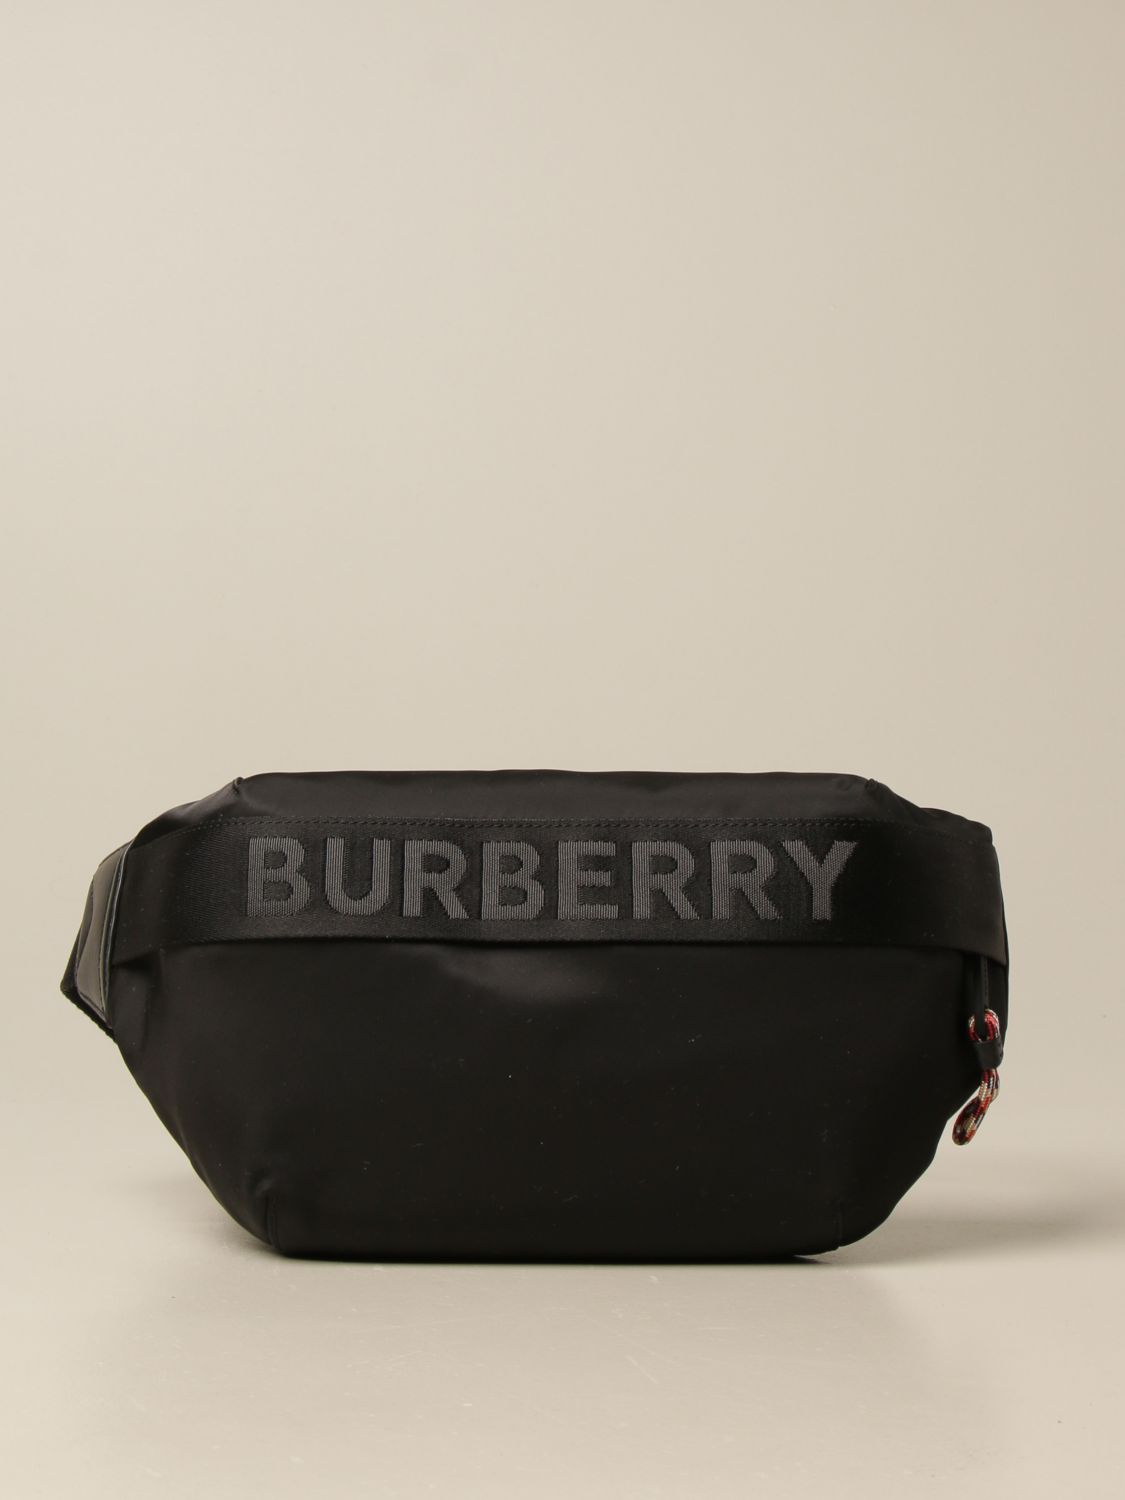 The Burberry Belt Bag Is a Way to Own a Piece of History